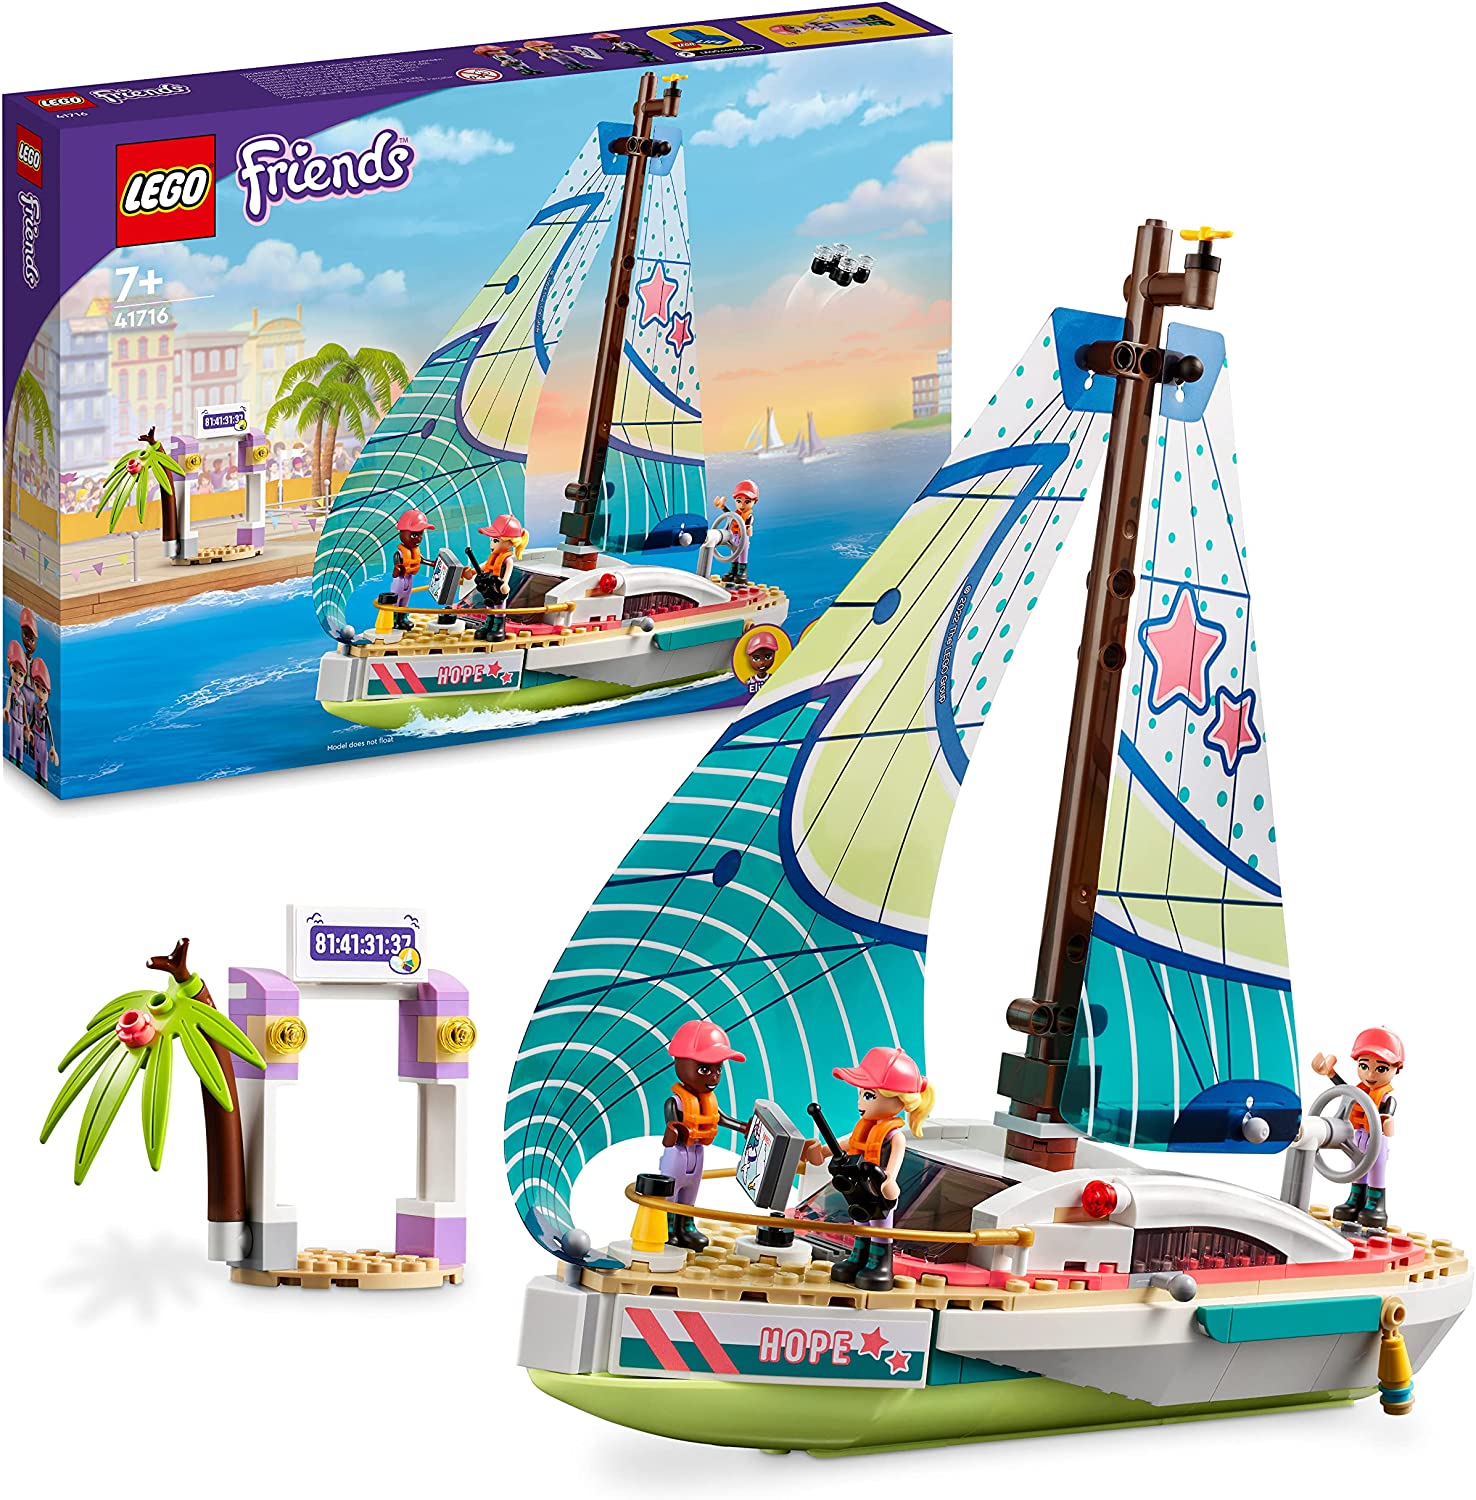 LEGO 41716 Friends Stephanies Sailing Adventure Toy Sailing Boat with 3 Mini Dolls, Gift for Children from 7 Years